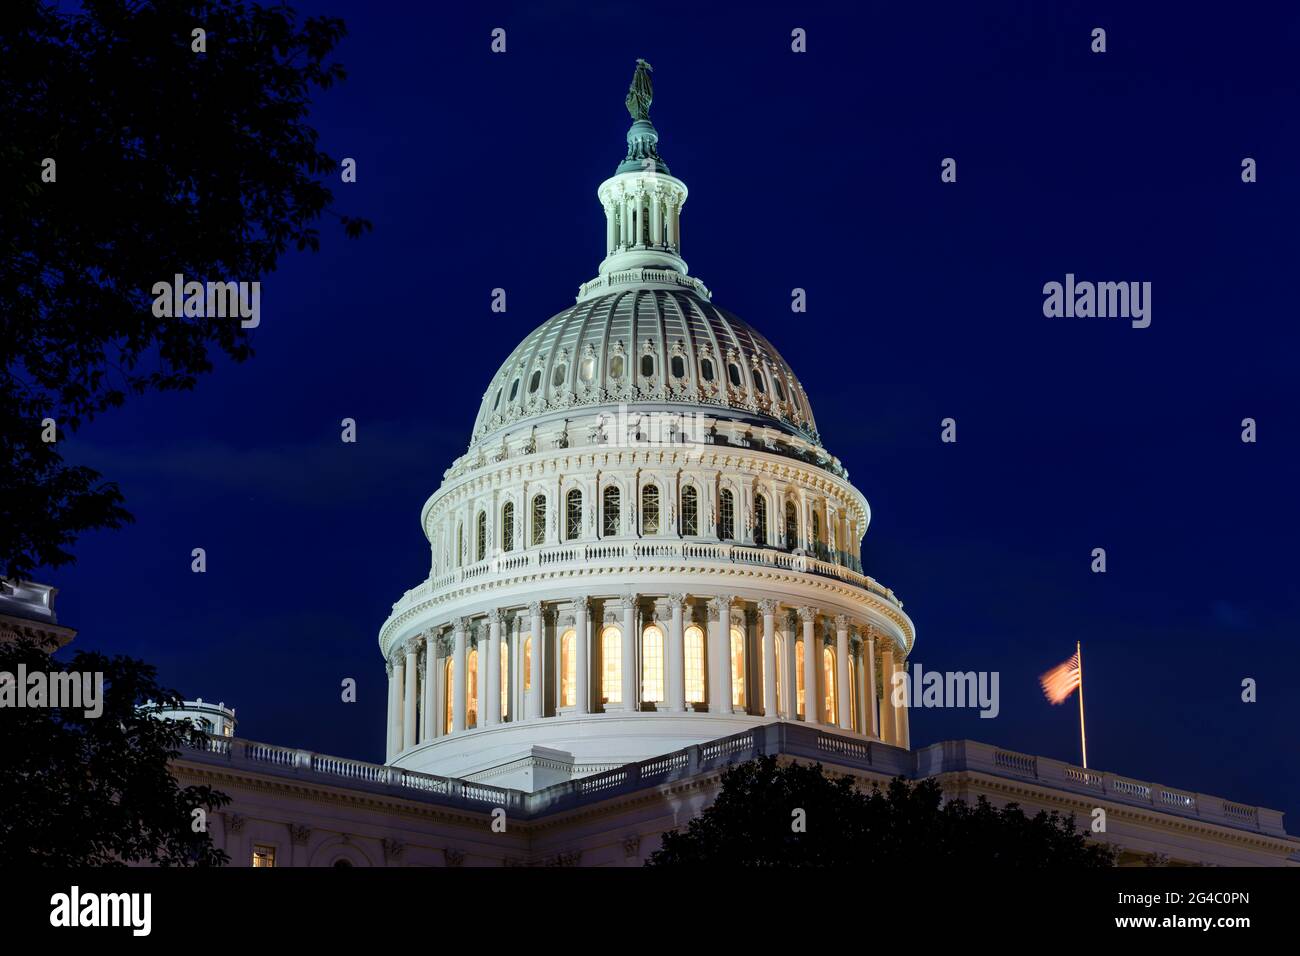 Capitol Dome at Night - A close-up night view of the dome of the U.S. Capitol Building. Washington, D.C., USA. Stock Photo